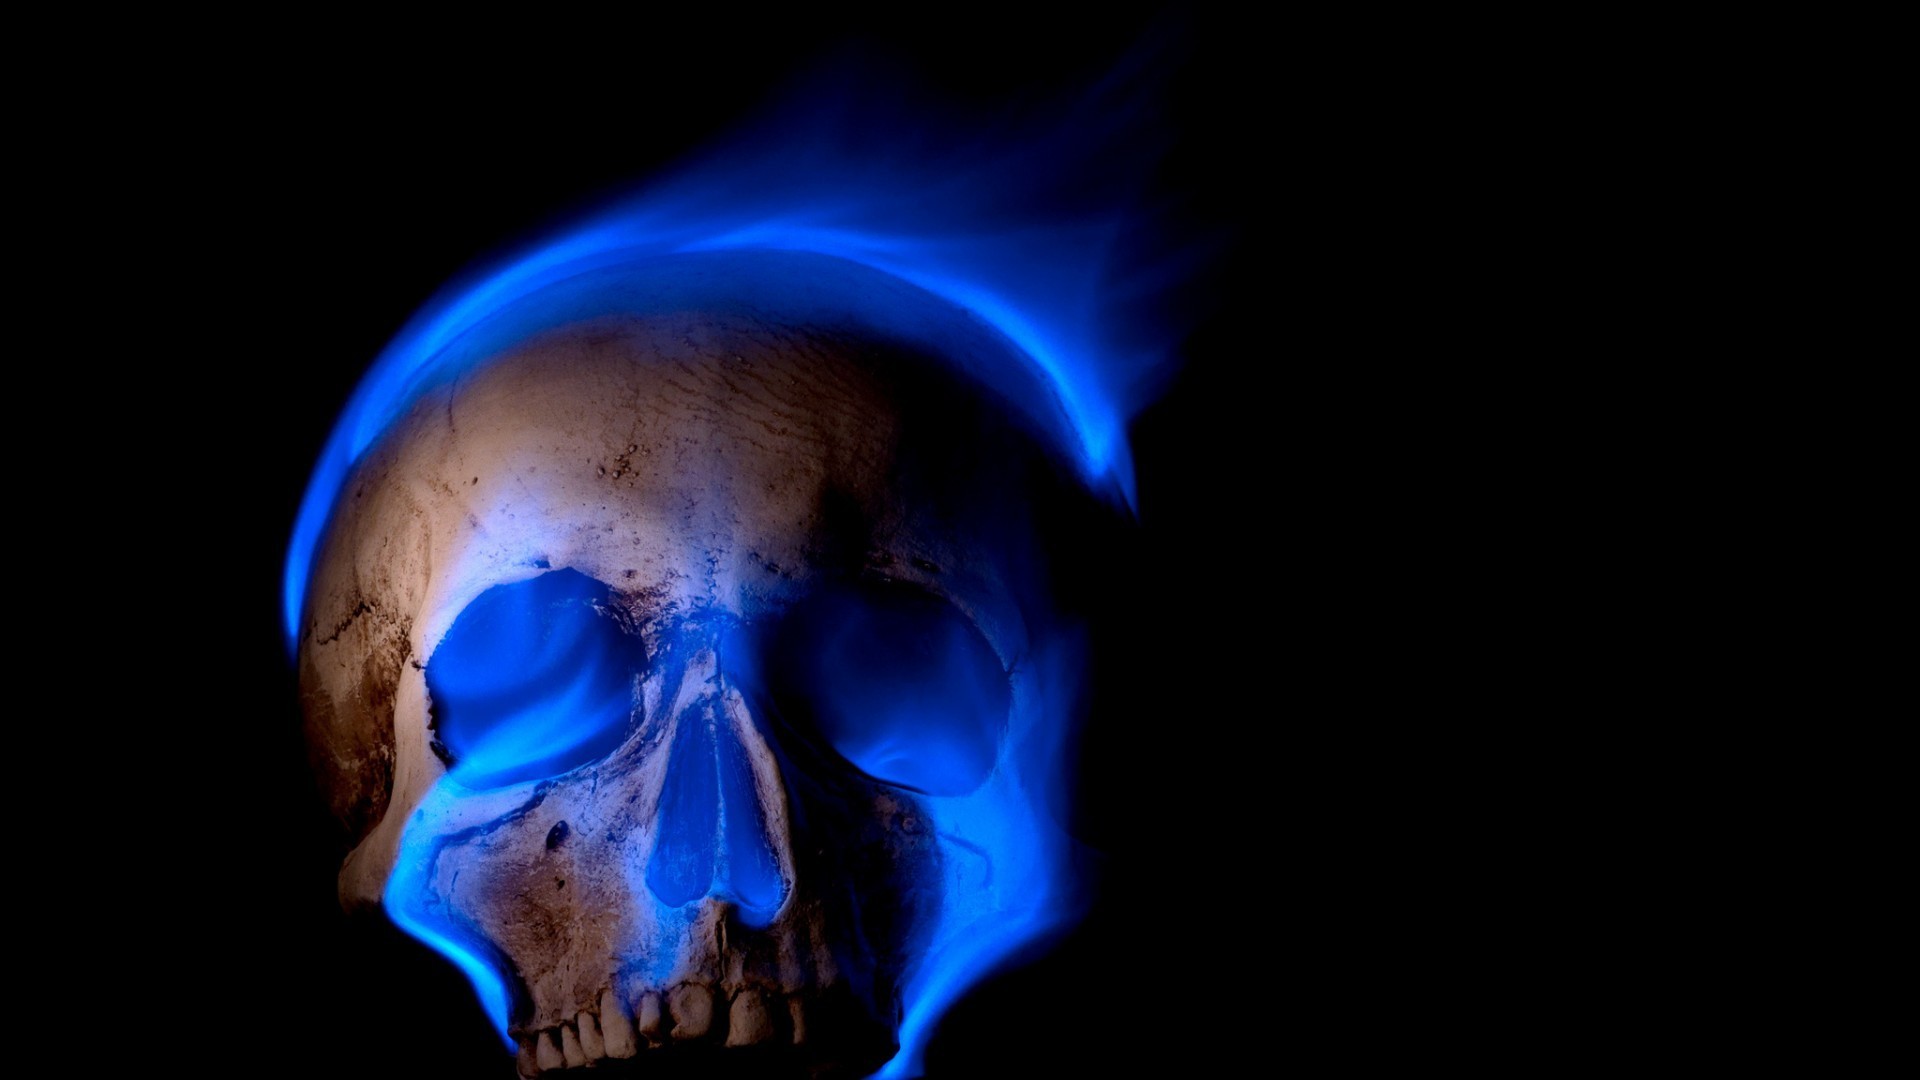 1920x1080 blue flame live wallpaper - Android Apps on Google Play